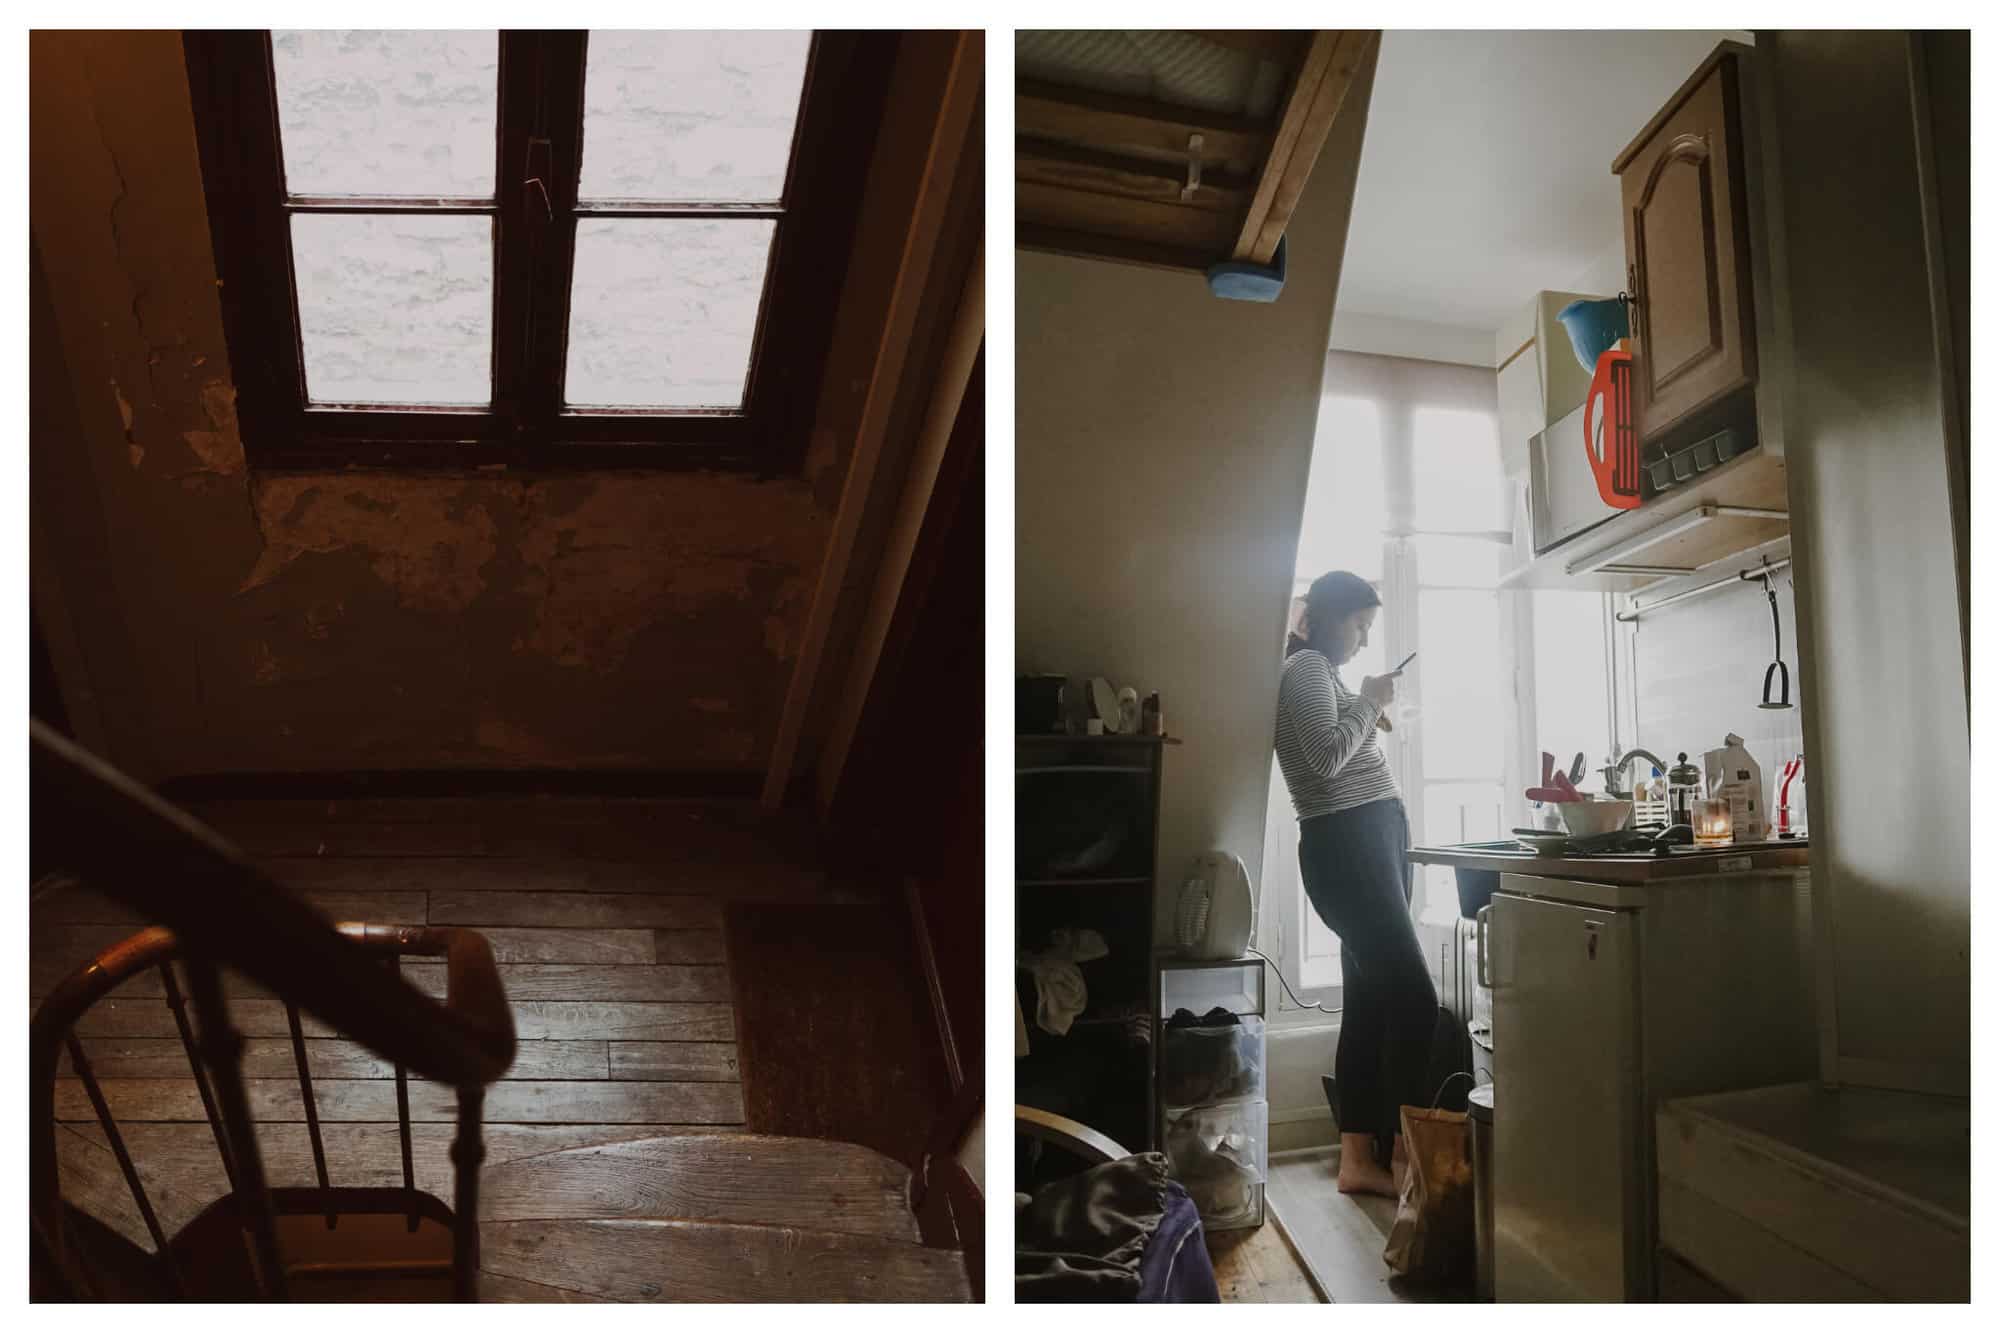 Left: A wooden, Parisian staircase that leads to the Chambre de Bonne apartments. Right: The author Shabnan Ferdowsi is standing beside her kitchen sink, texting on her phone, inside her chambre de bonne.